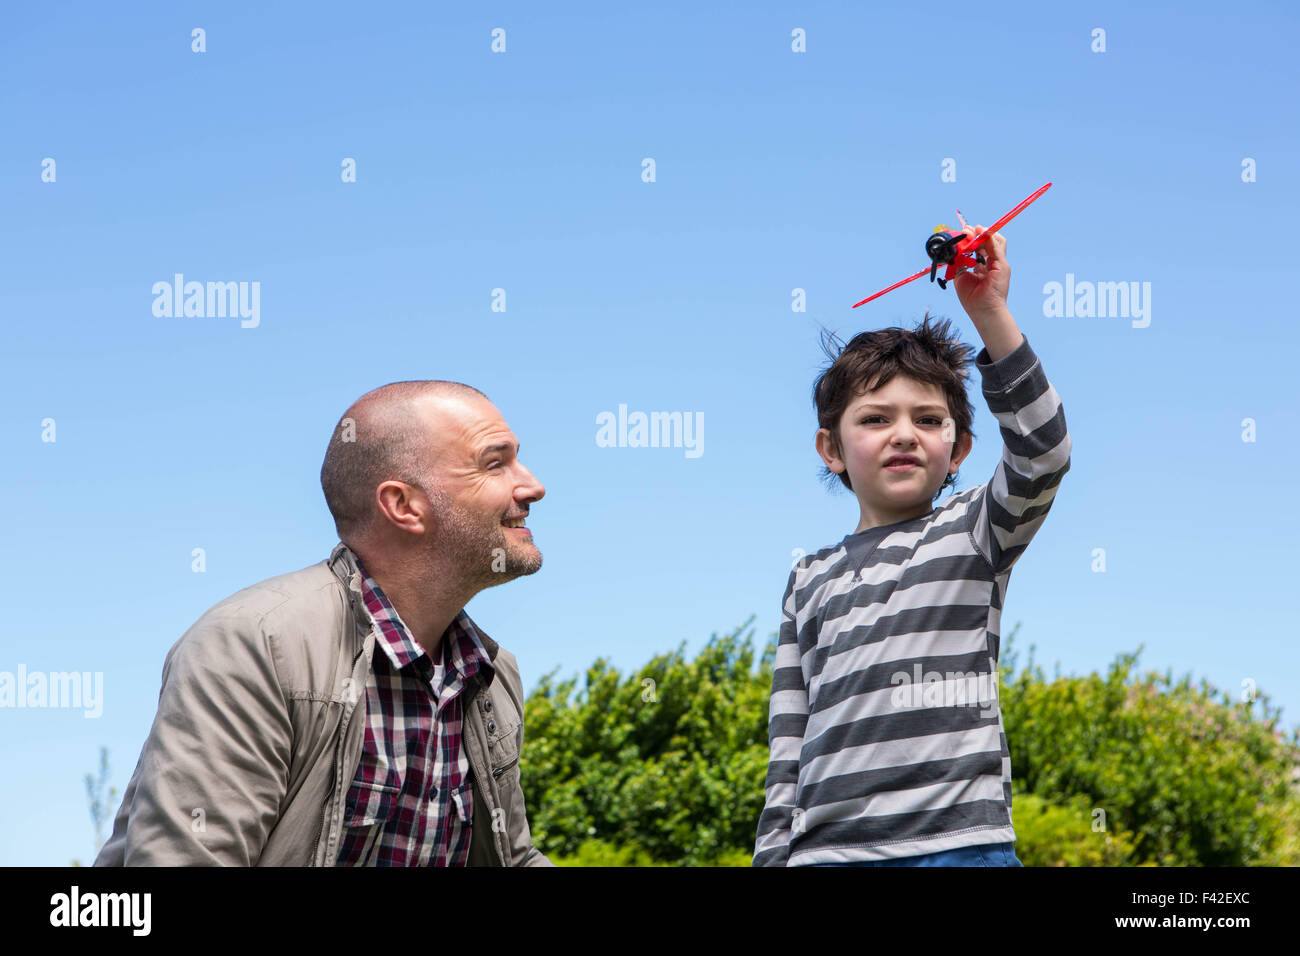 Young boy playing with a toy plane Stock Photo